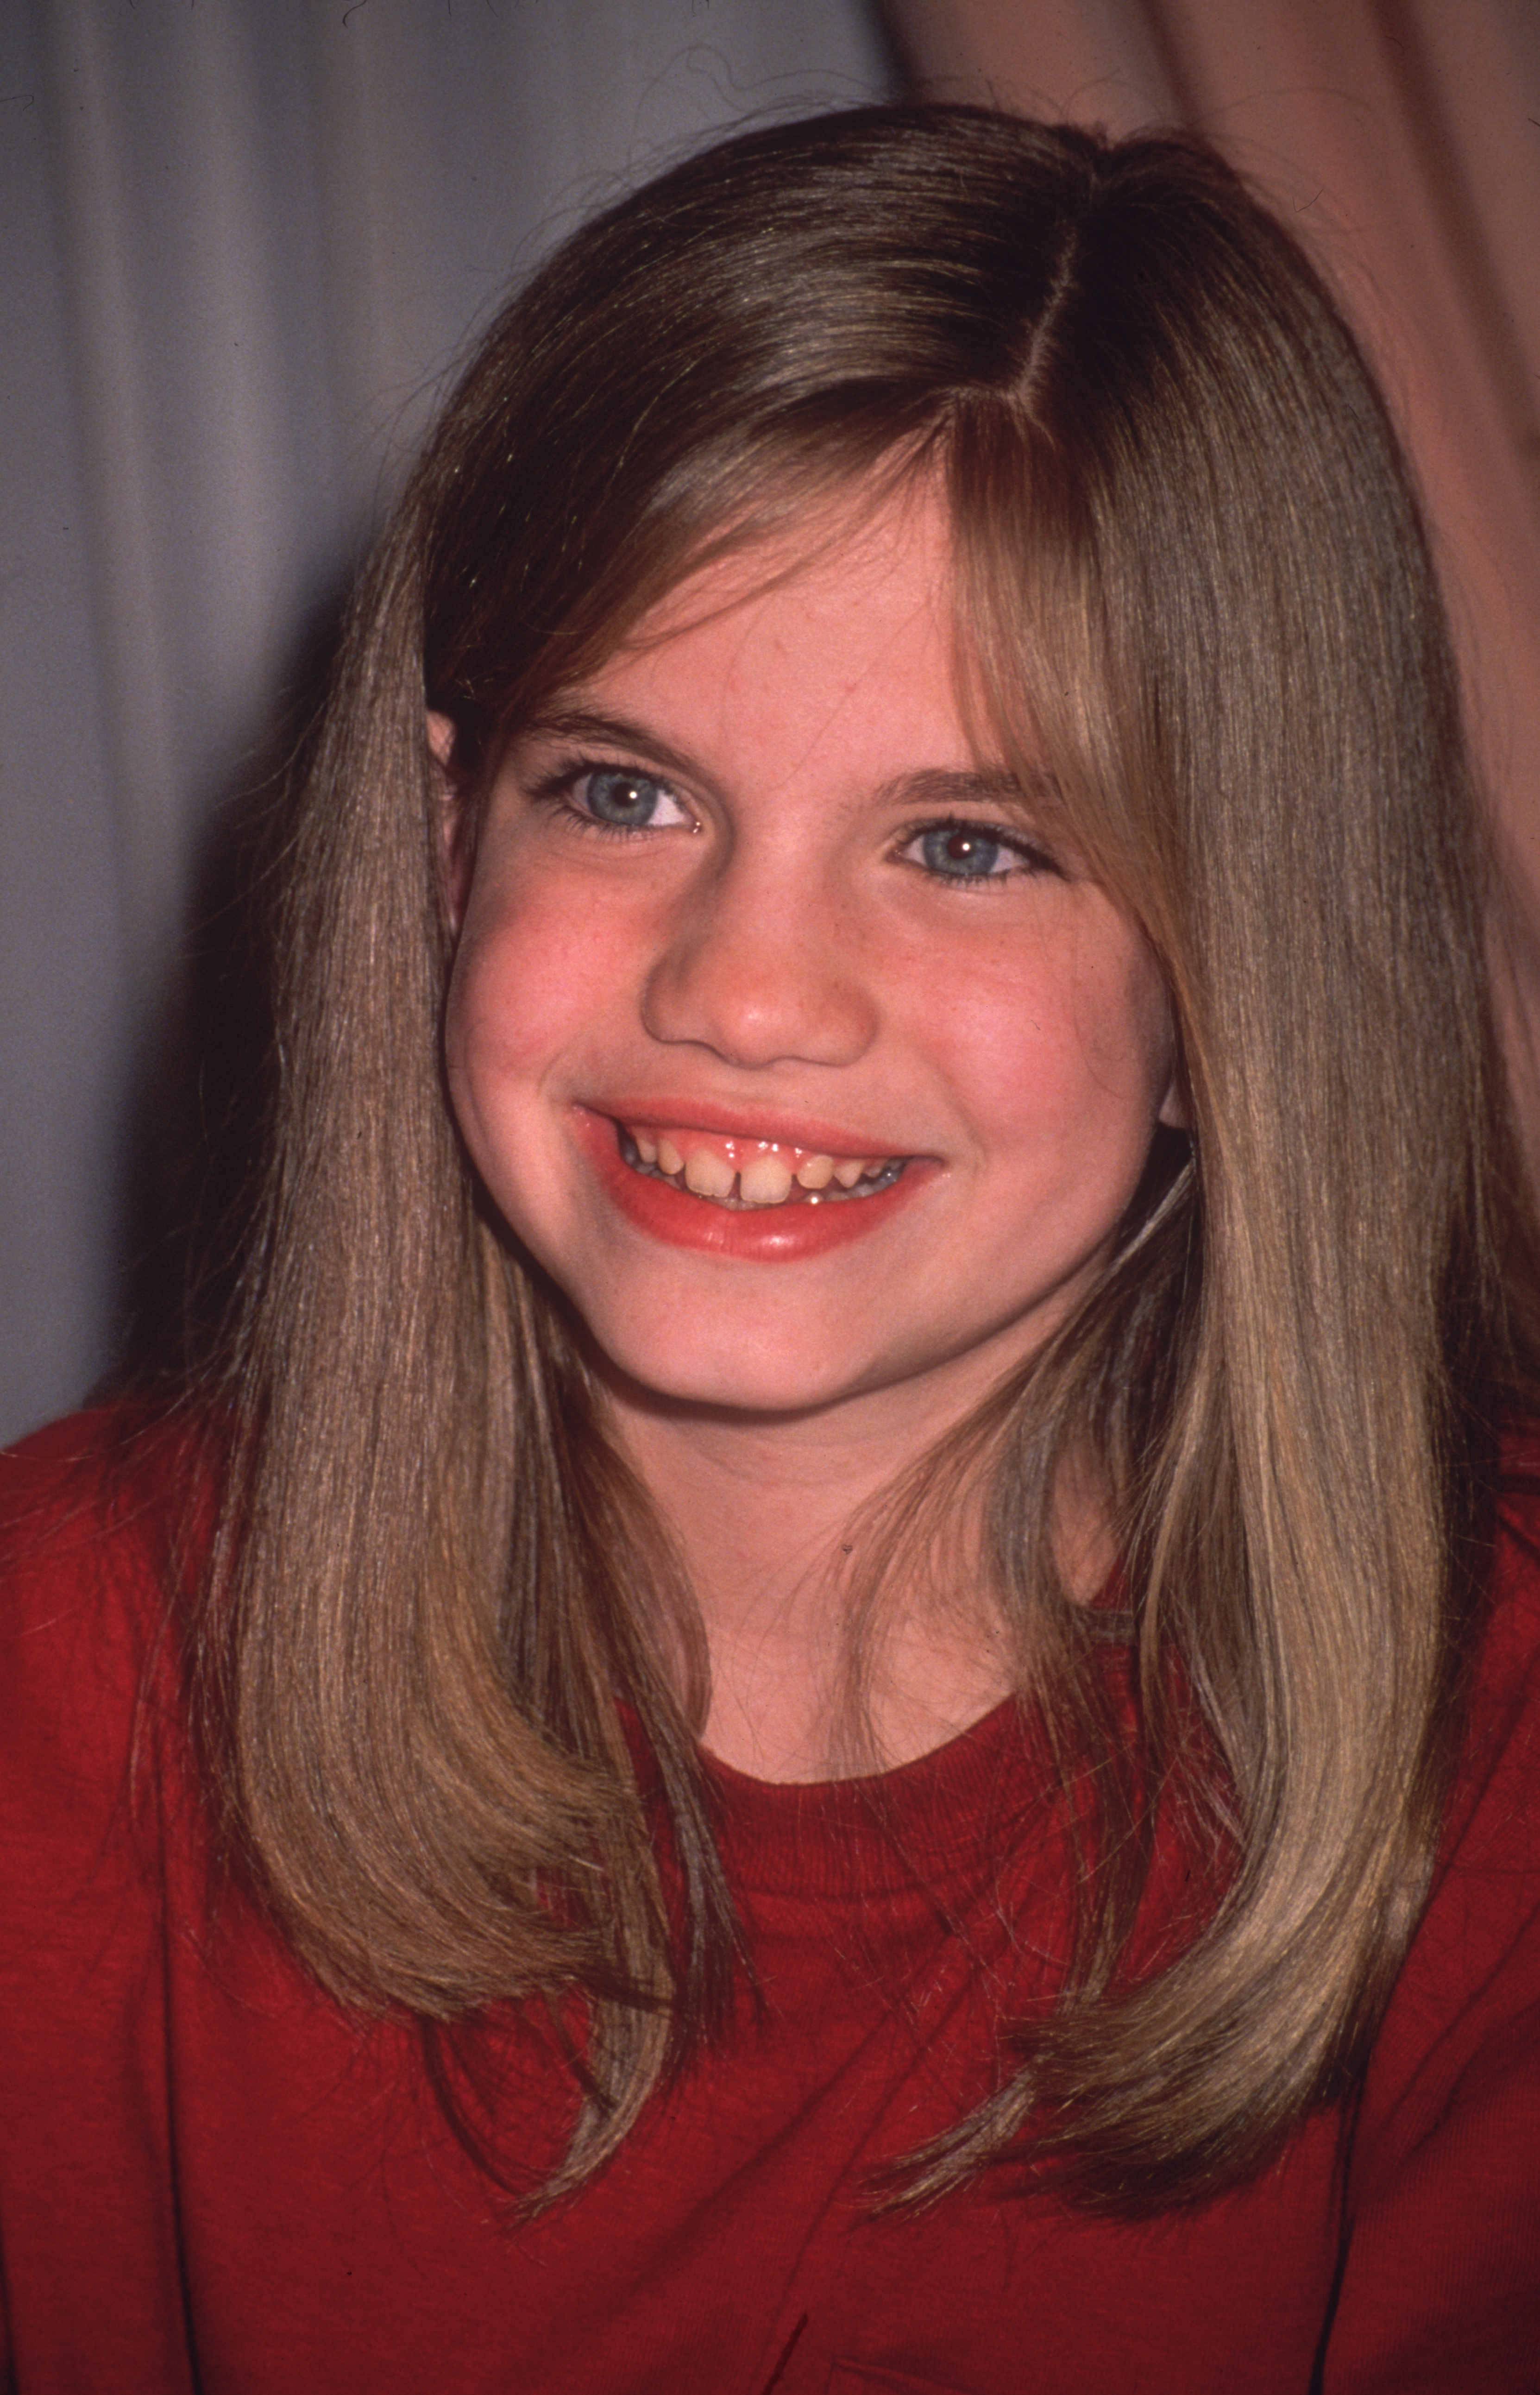 Anna Chlumsky smiling in a headshot circa 1995 | Source: Getty Images